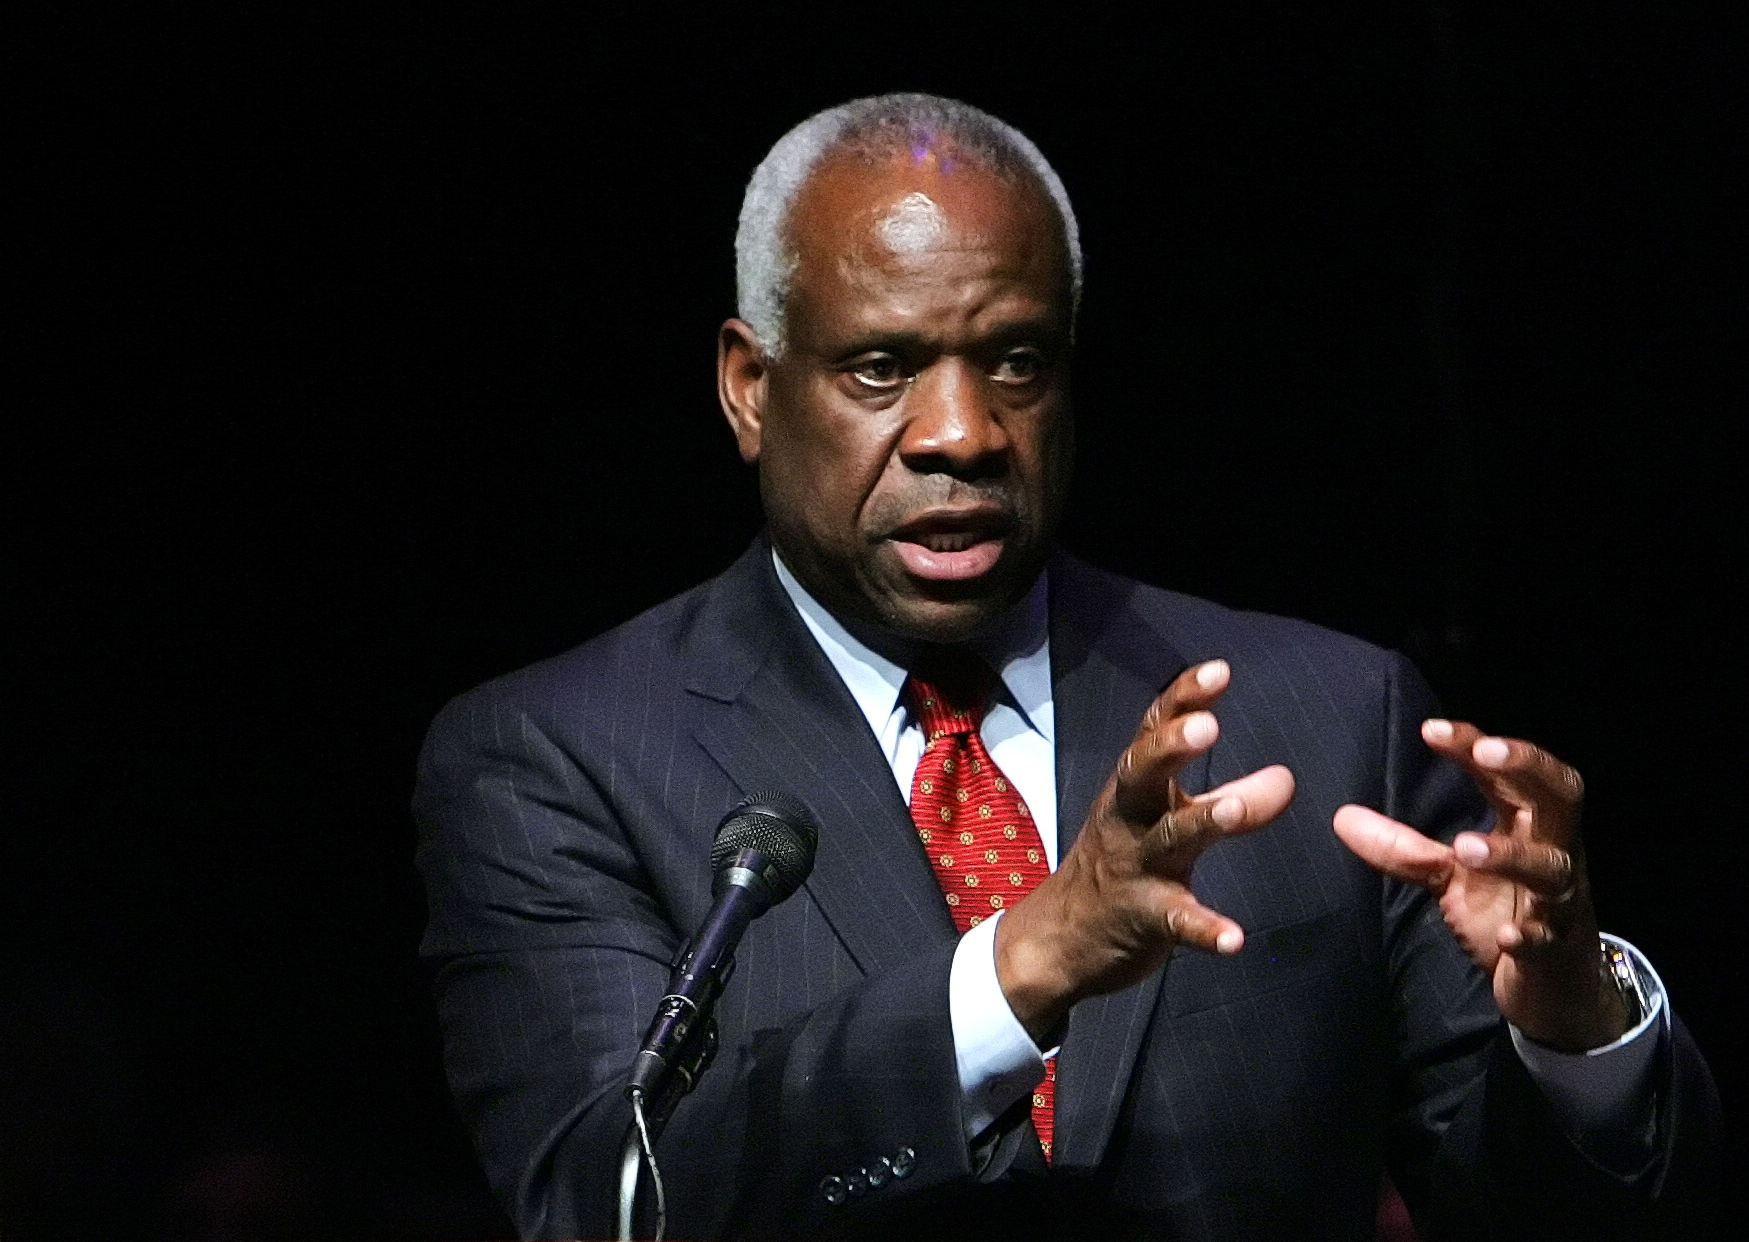 Clarence Thomas to swear in Mike Pence at inauguration